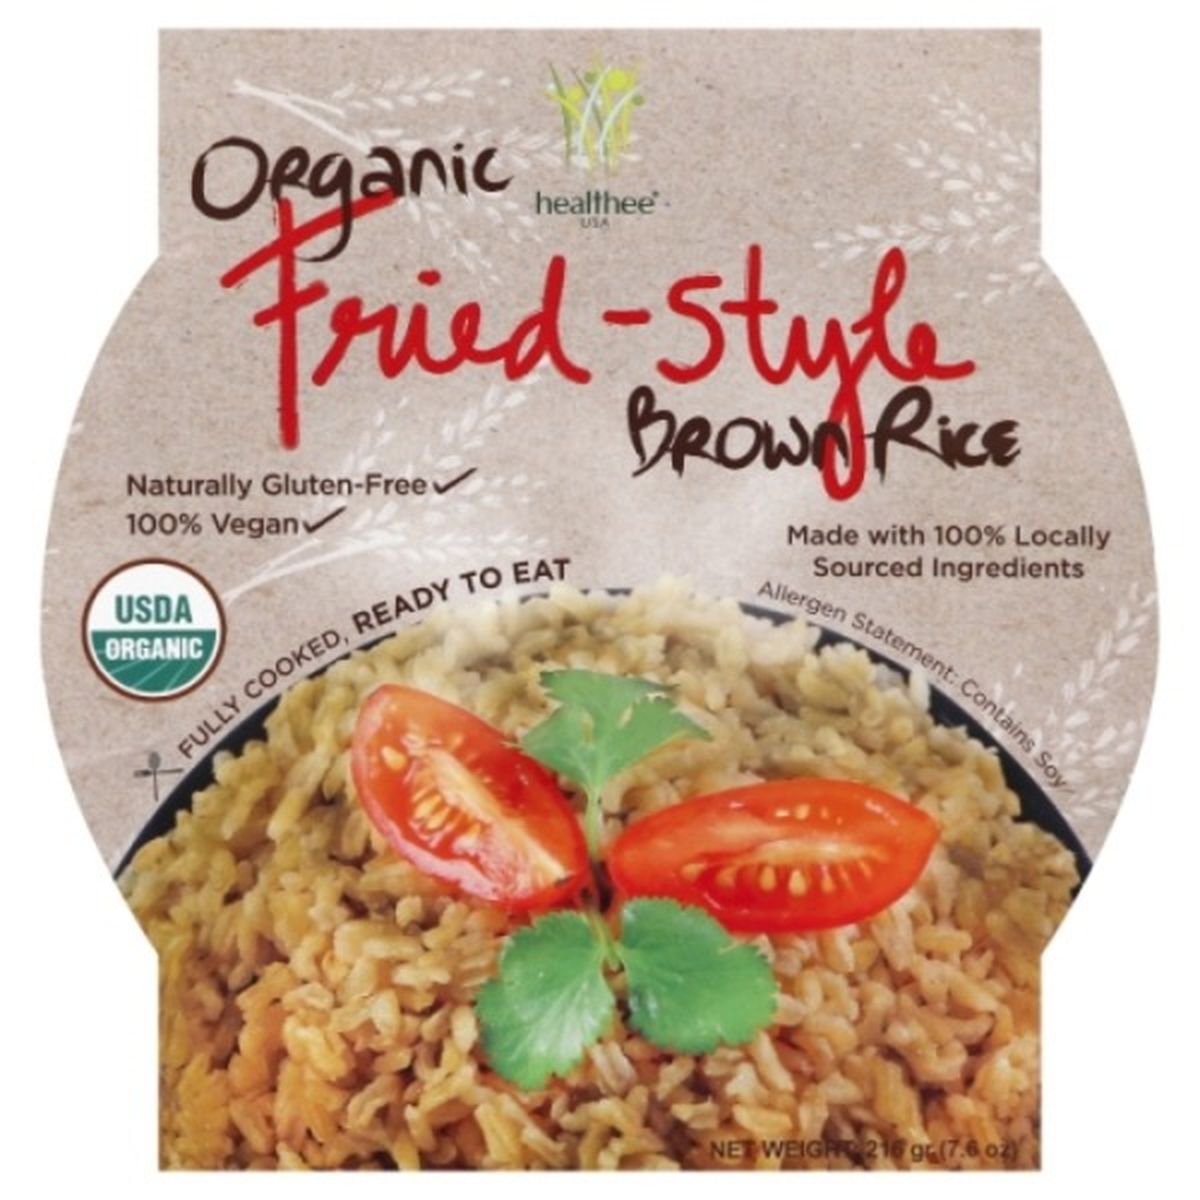 Calories in Healthee Brown Rice, Organic, Fried-Style